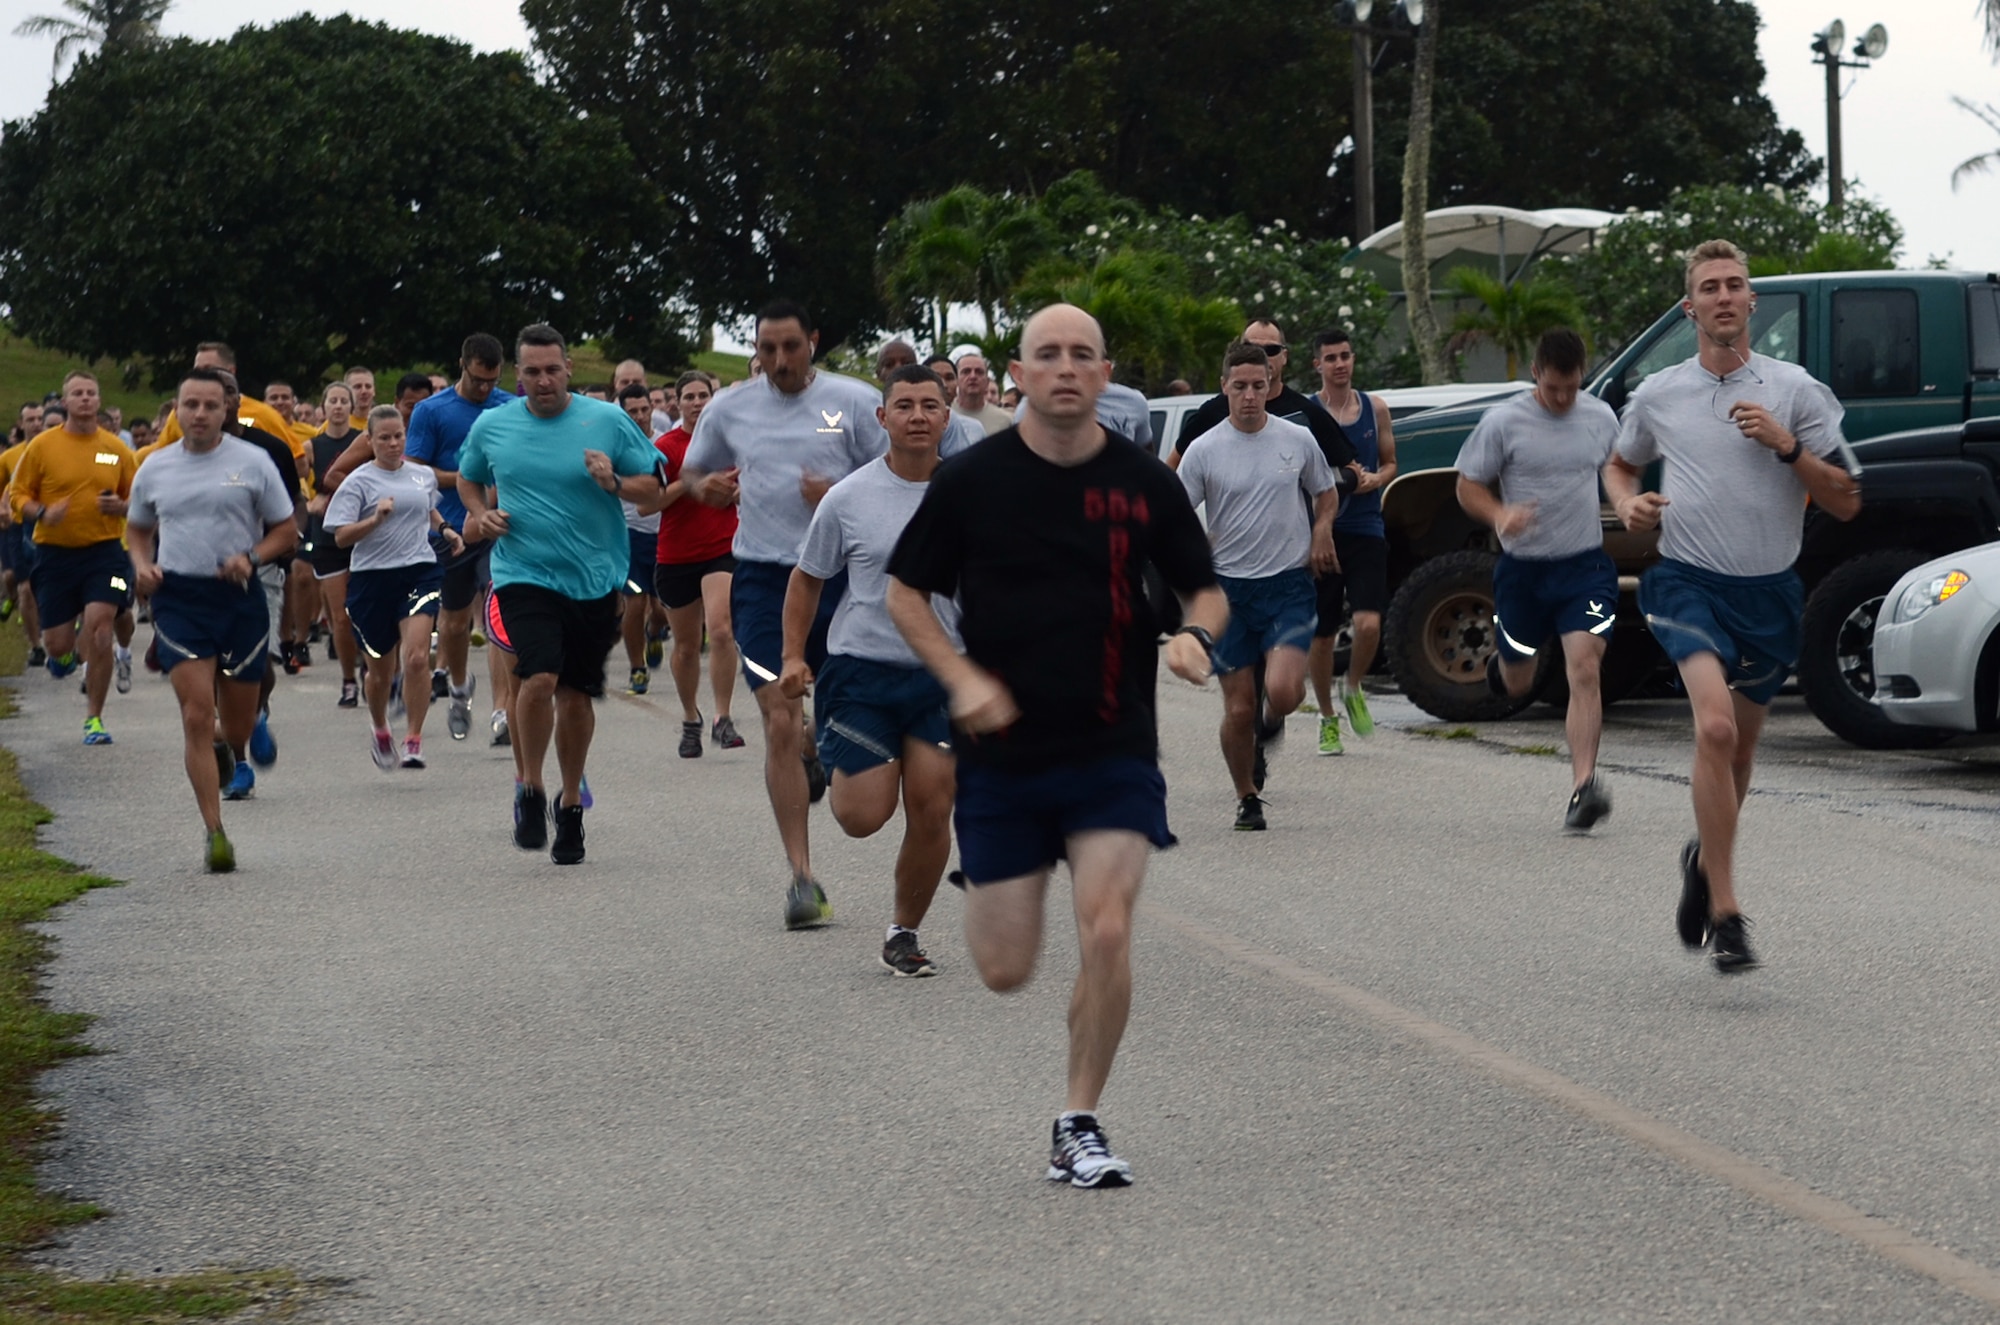 Team Andersen members start the April Fool’s 5K at the Palm Tree Golf Course on Andersen Air Force Base, Guam, April 1, 2015. As an April Fool’s Day joke, runners were told by event coordinators the course had been changed to a half marathon instead of a 5K. (U.S. Air Force photo by Airman 1st Class Alexa Ann Henderson/Released)